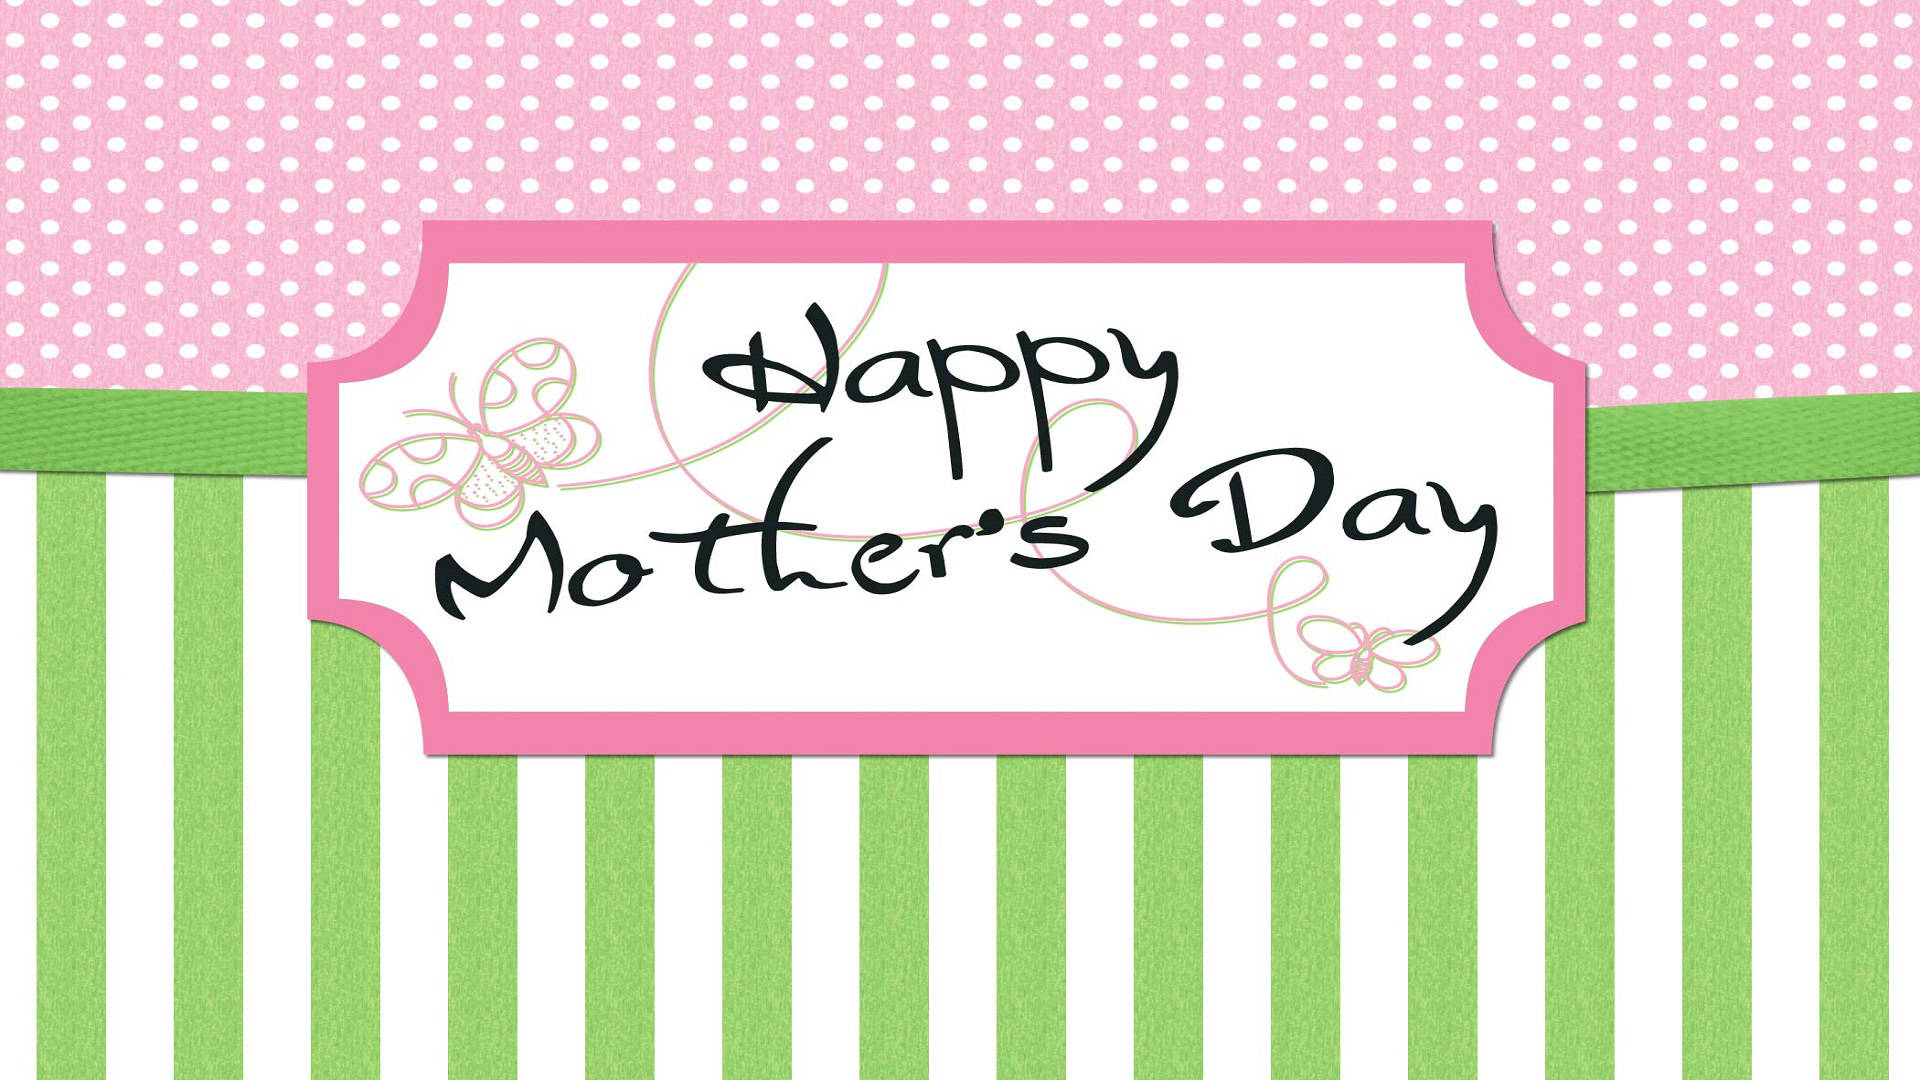 Happy Mothers Day Greeting Card Wallpaper